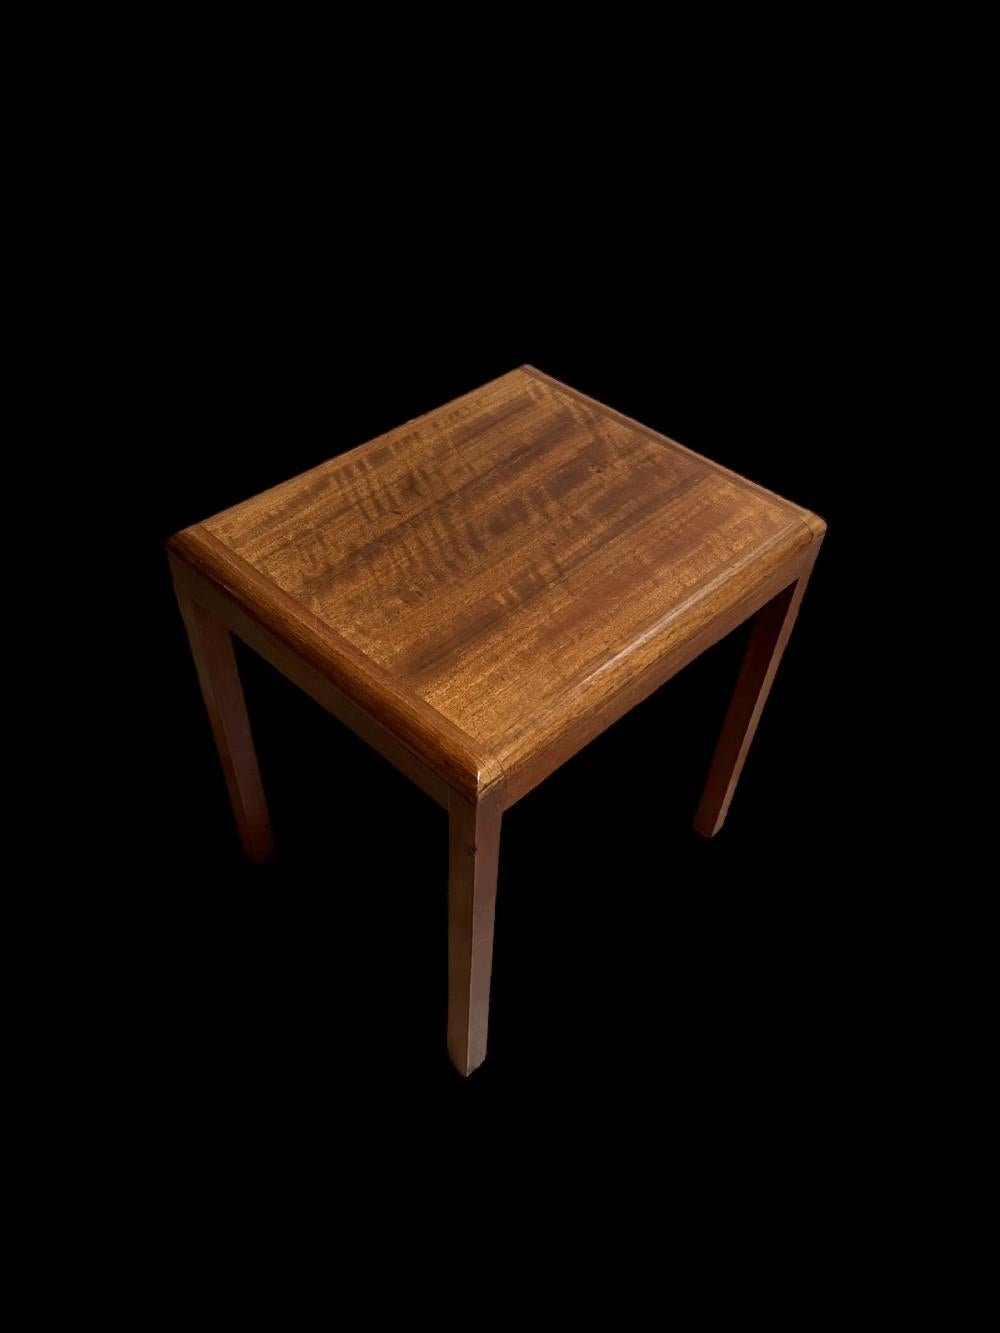 A walnut, rectangular side table / lamp table by Betty Joel, and the designers label to the underside, signed by Betty Joel and dated July 1935.
Betty Joel (pictured) designed furniture, textiles and interiors, and had shops in Sloane Square and